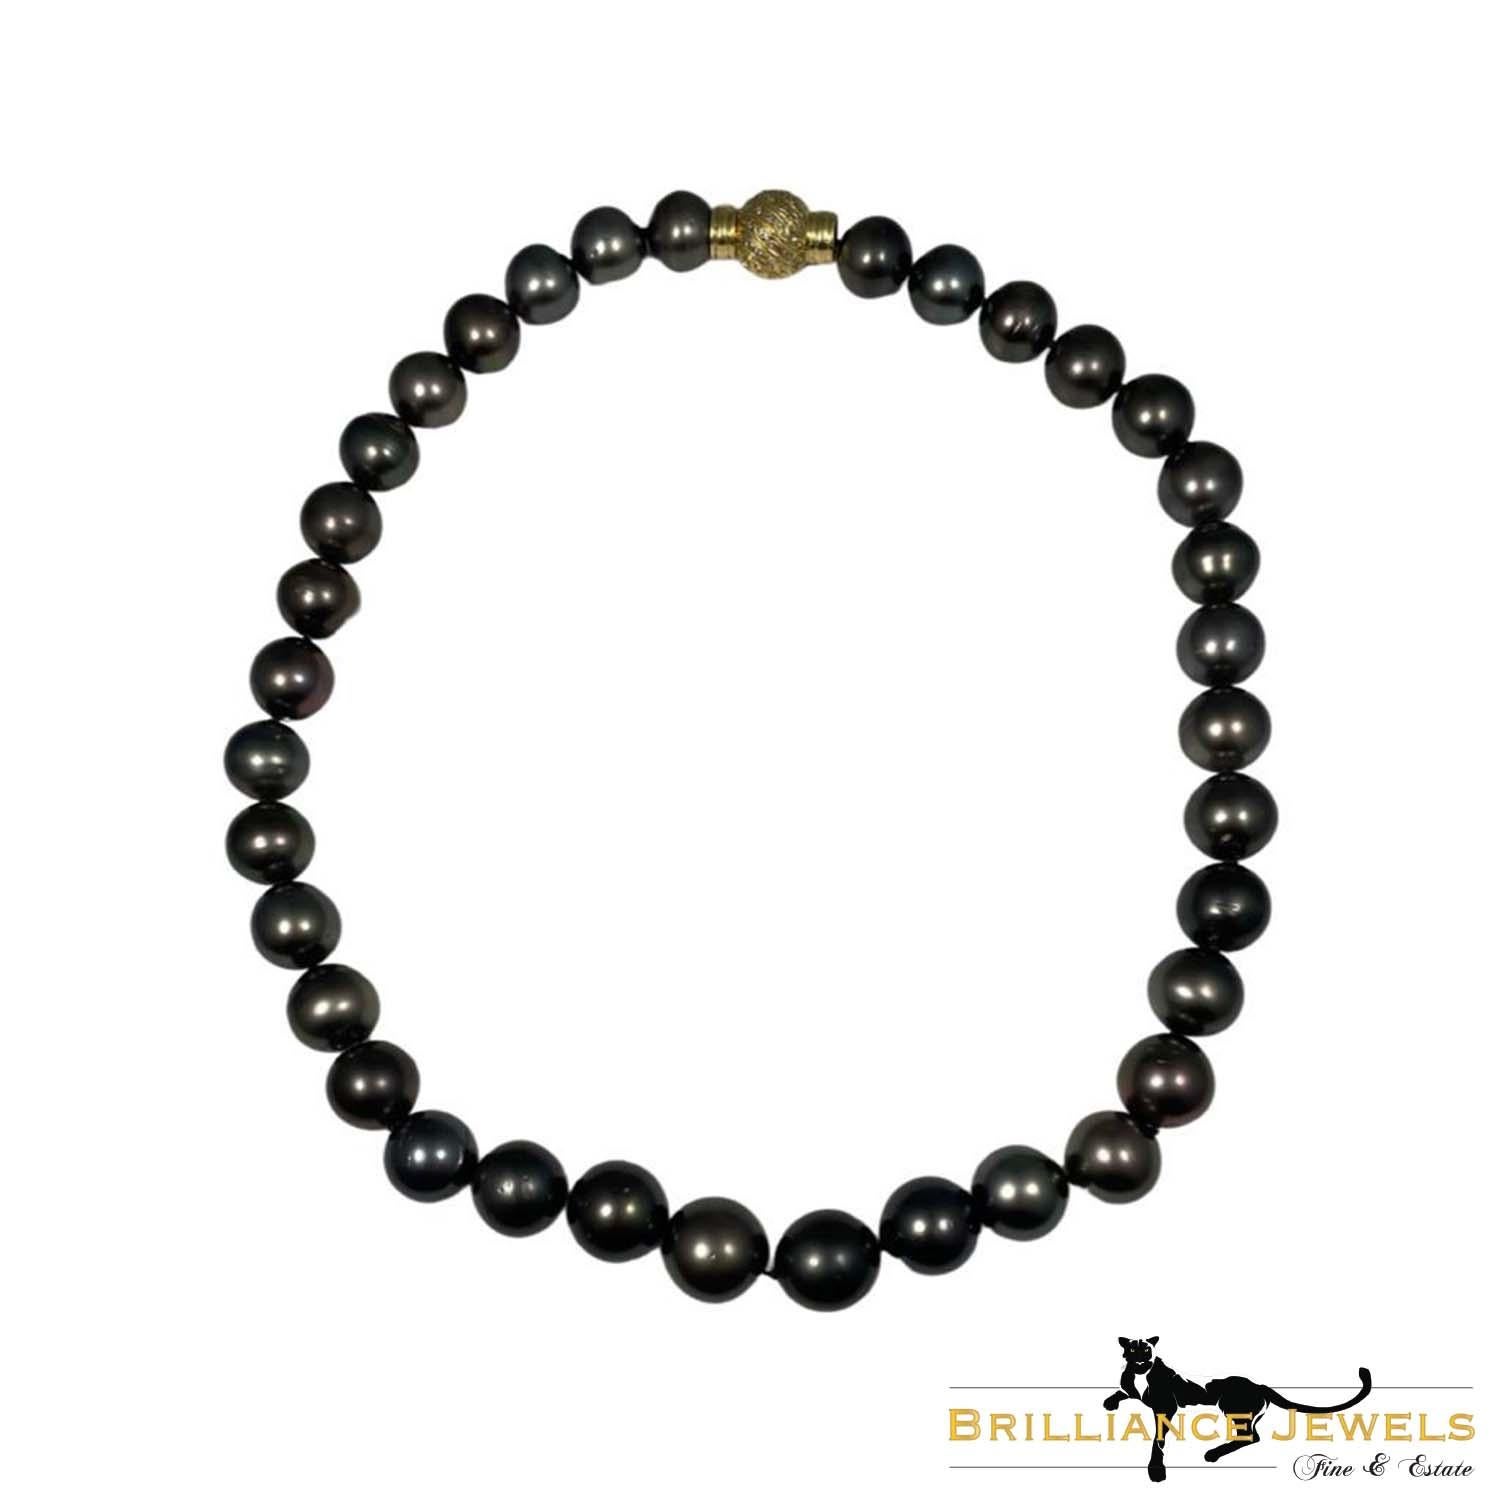 Style:  Pearl Necklace 

Metal: Yellow Gold 

Metal Purity: 18K

Length : Approx. 16.5 Inches

Total  Item Weight(Grams) :  Approx. 1.86g

​​​​​​​​​​​​Includes: 24 Month Brilliance Jewels Warranty 

                     Brilliance Jewels Packaging